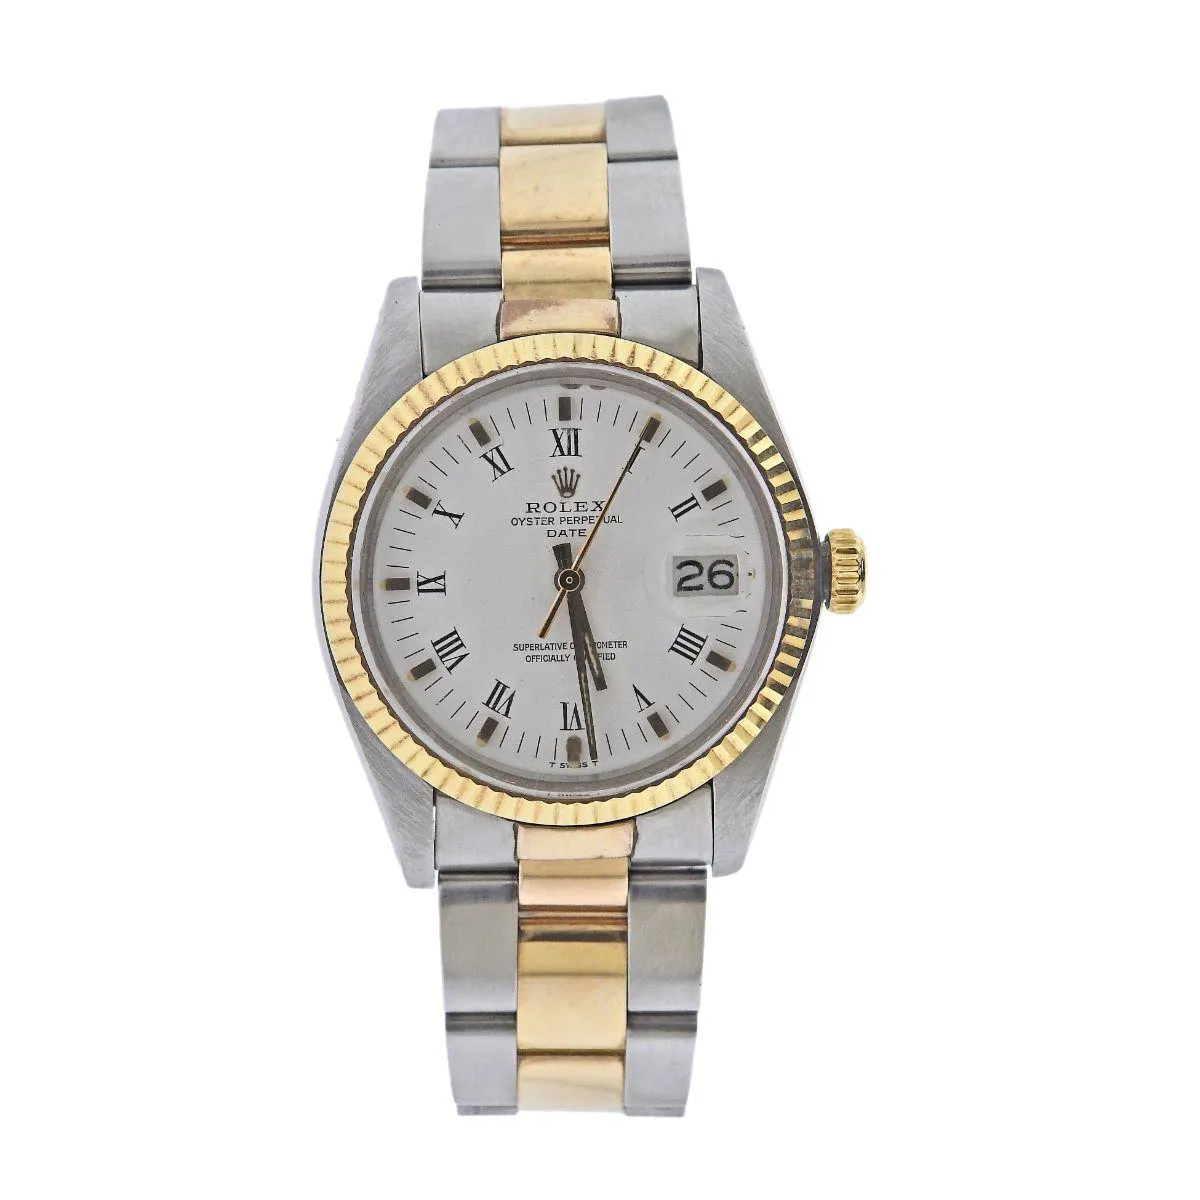 Rolex Oyster Perpetual Date 1500 34mm Yellow gold and stainless steel White